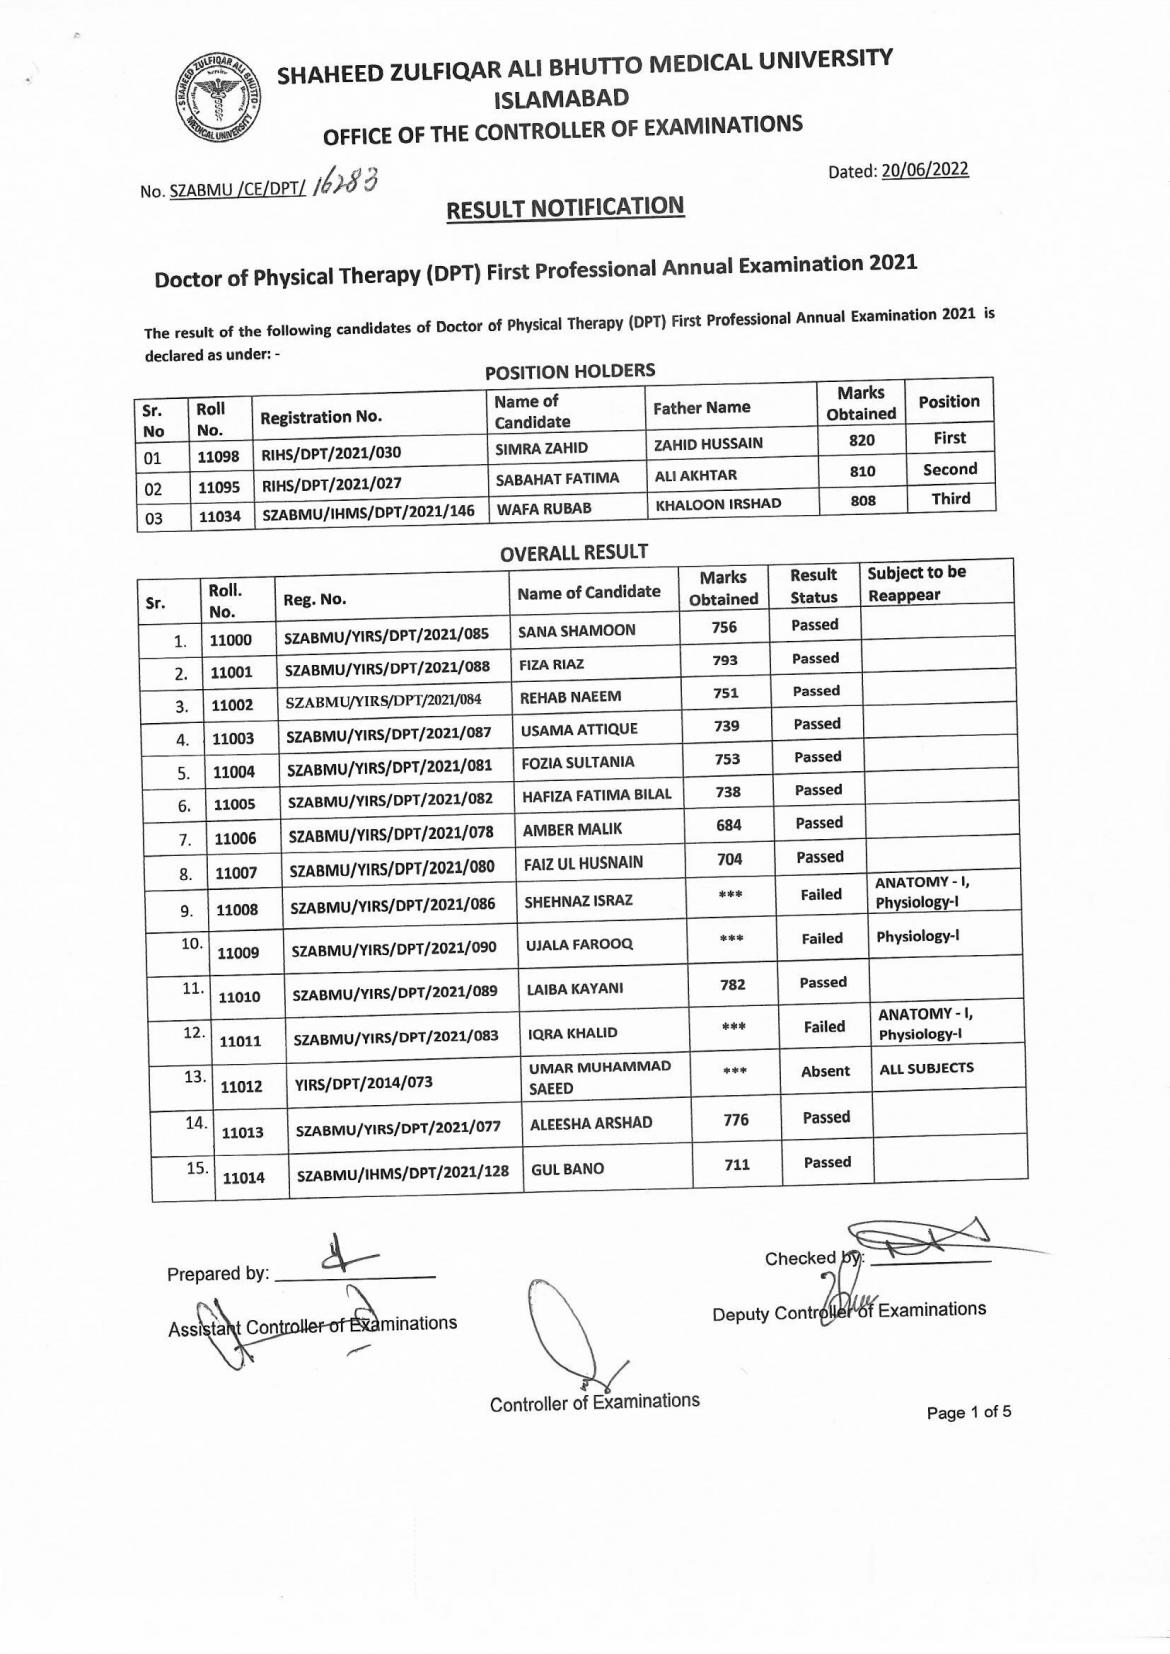 Result Notification - DPT First Professional Annual Examination 2021